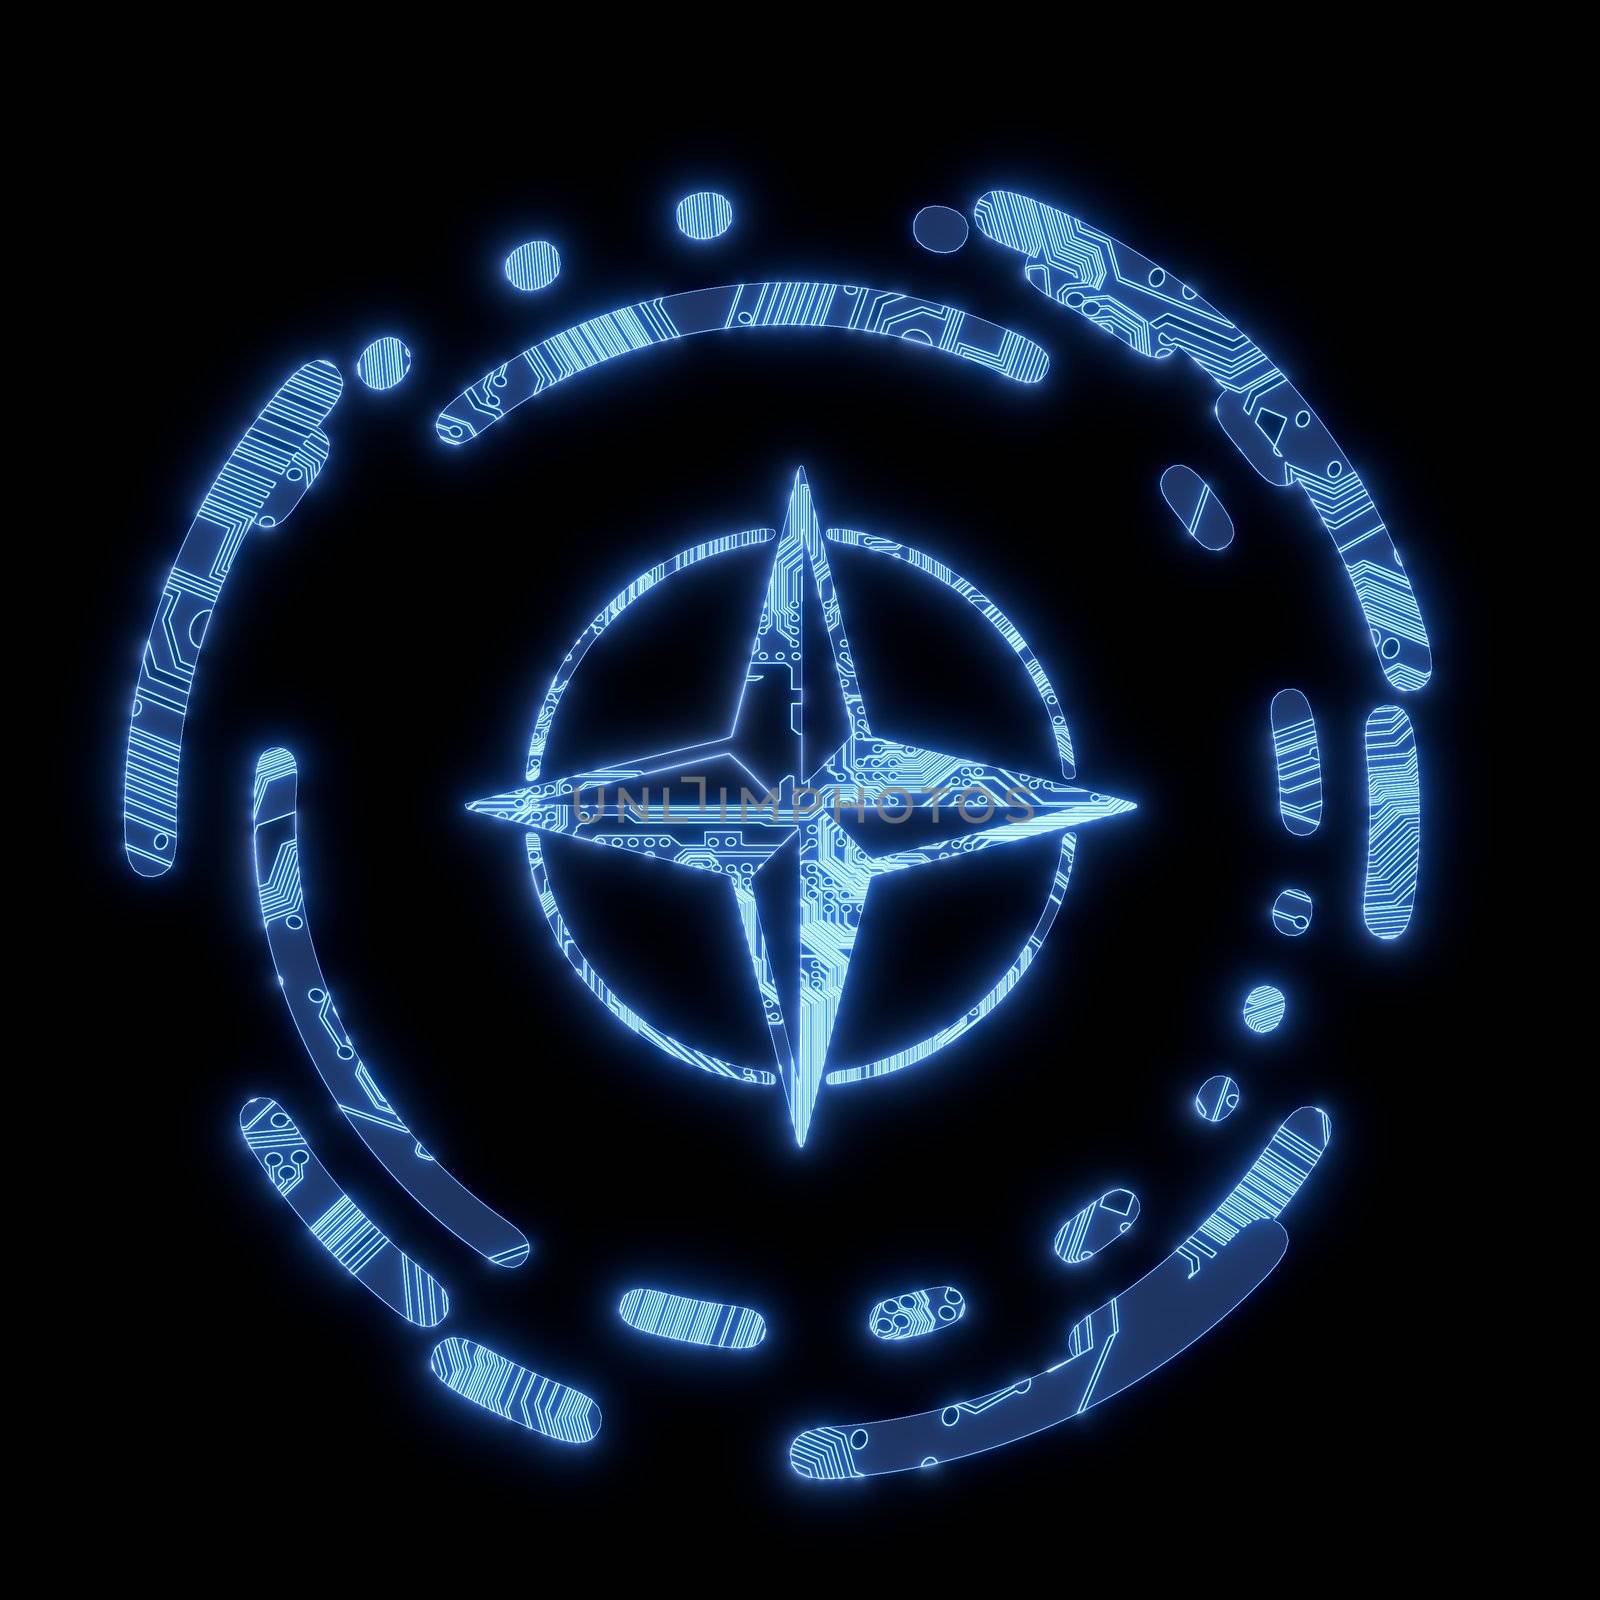 3D Graphic Steel blue  electronic compass symbol in a dark background on a computer chip